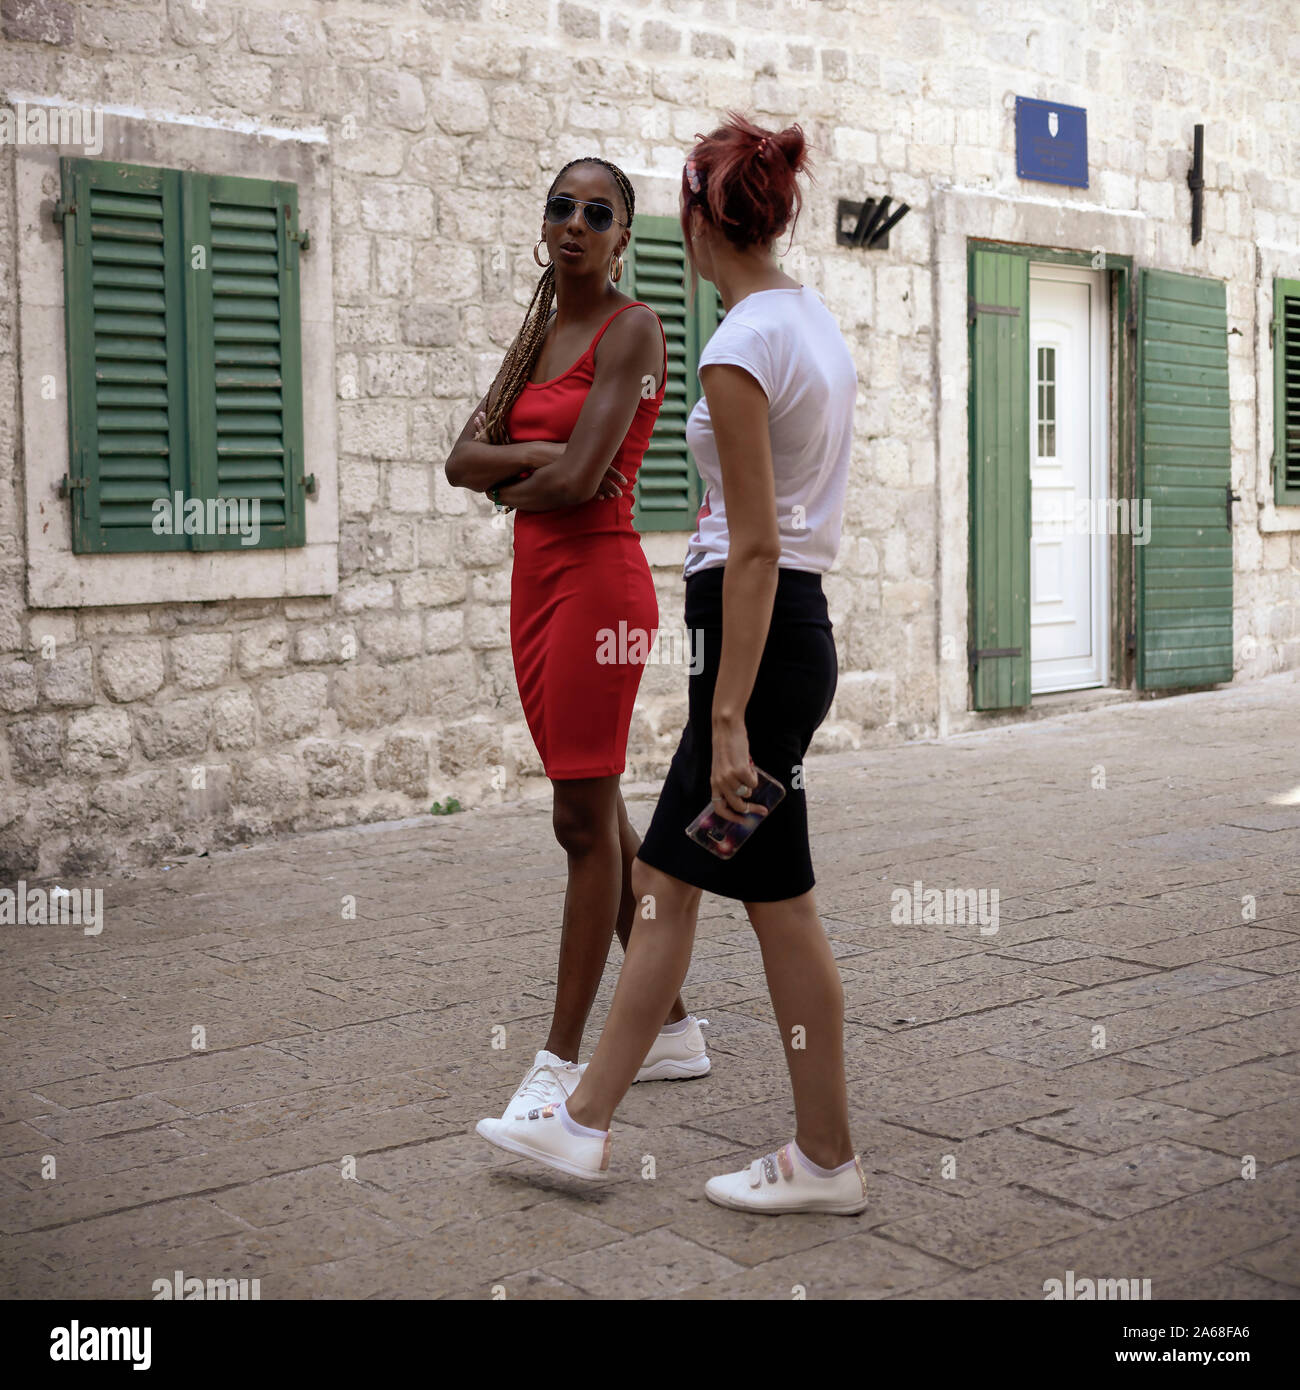 Montenegro, Sep 18, 2019: Two slender women standing and chatting on the street in Kotor Old Town Stock Photo